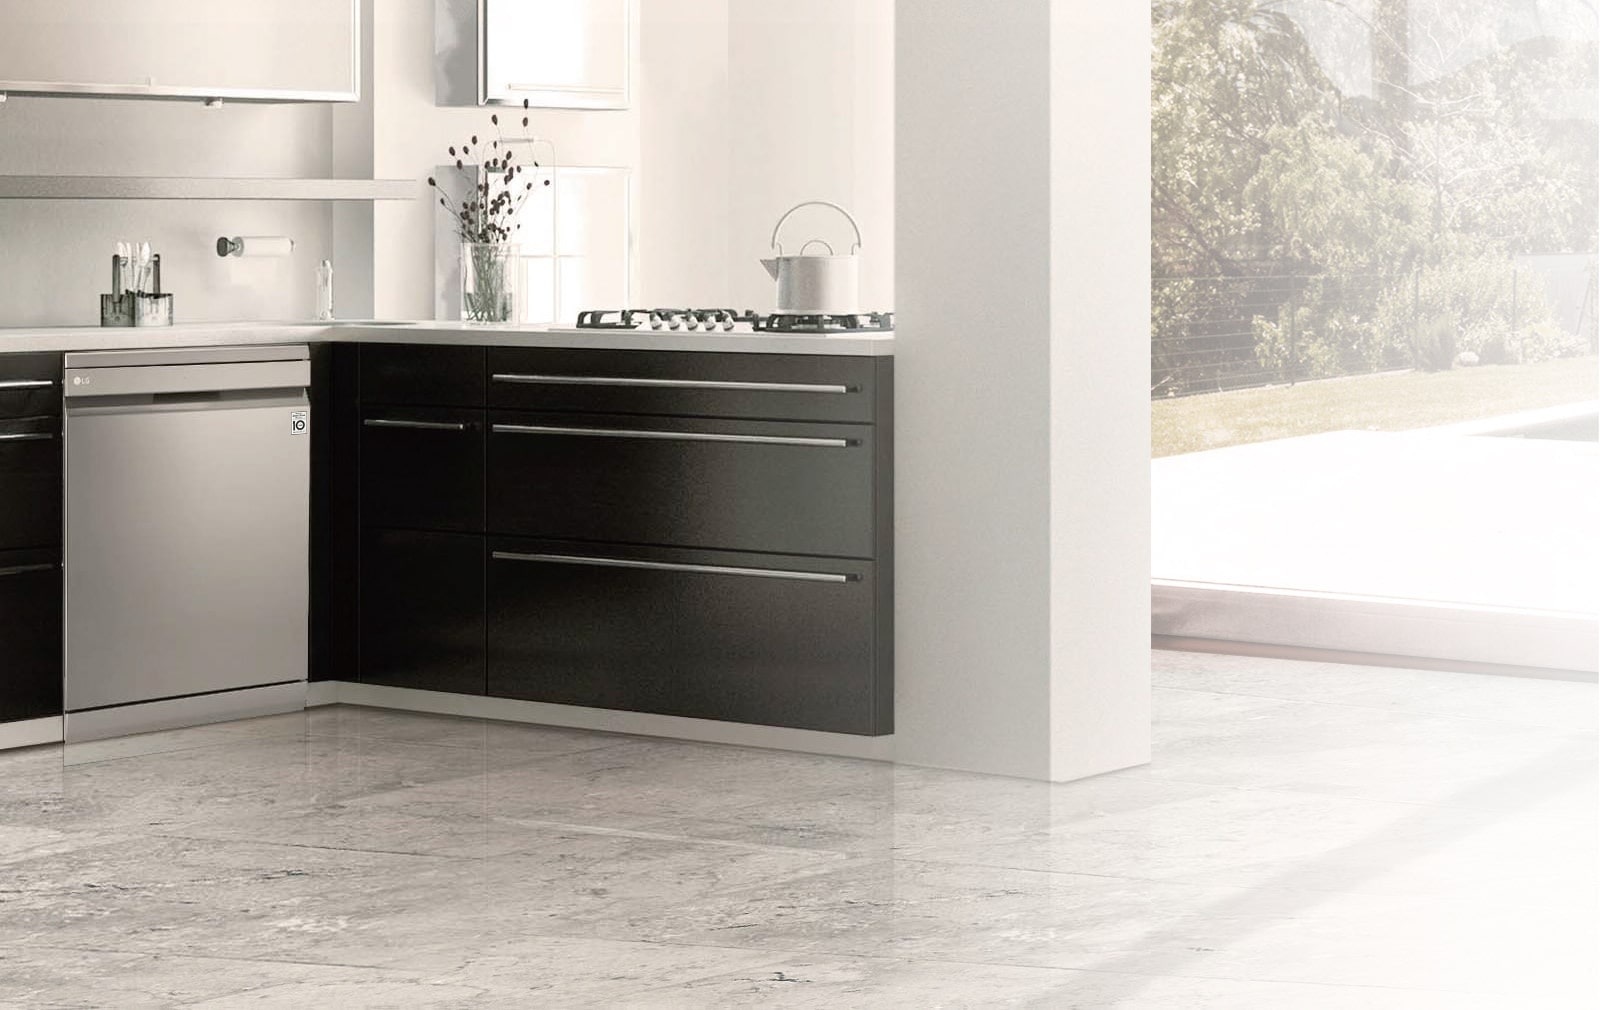 Upgrade the Look of Your Kitchen<br>1